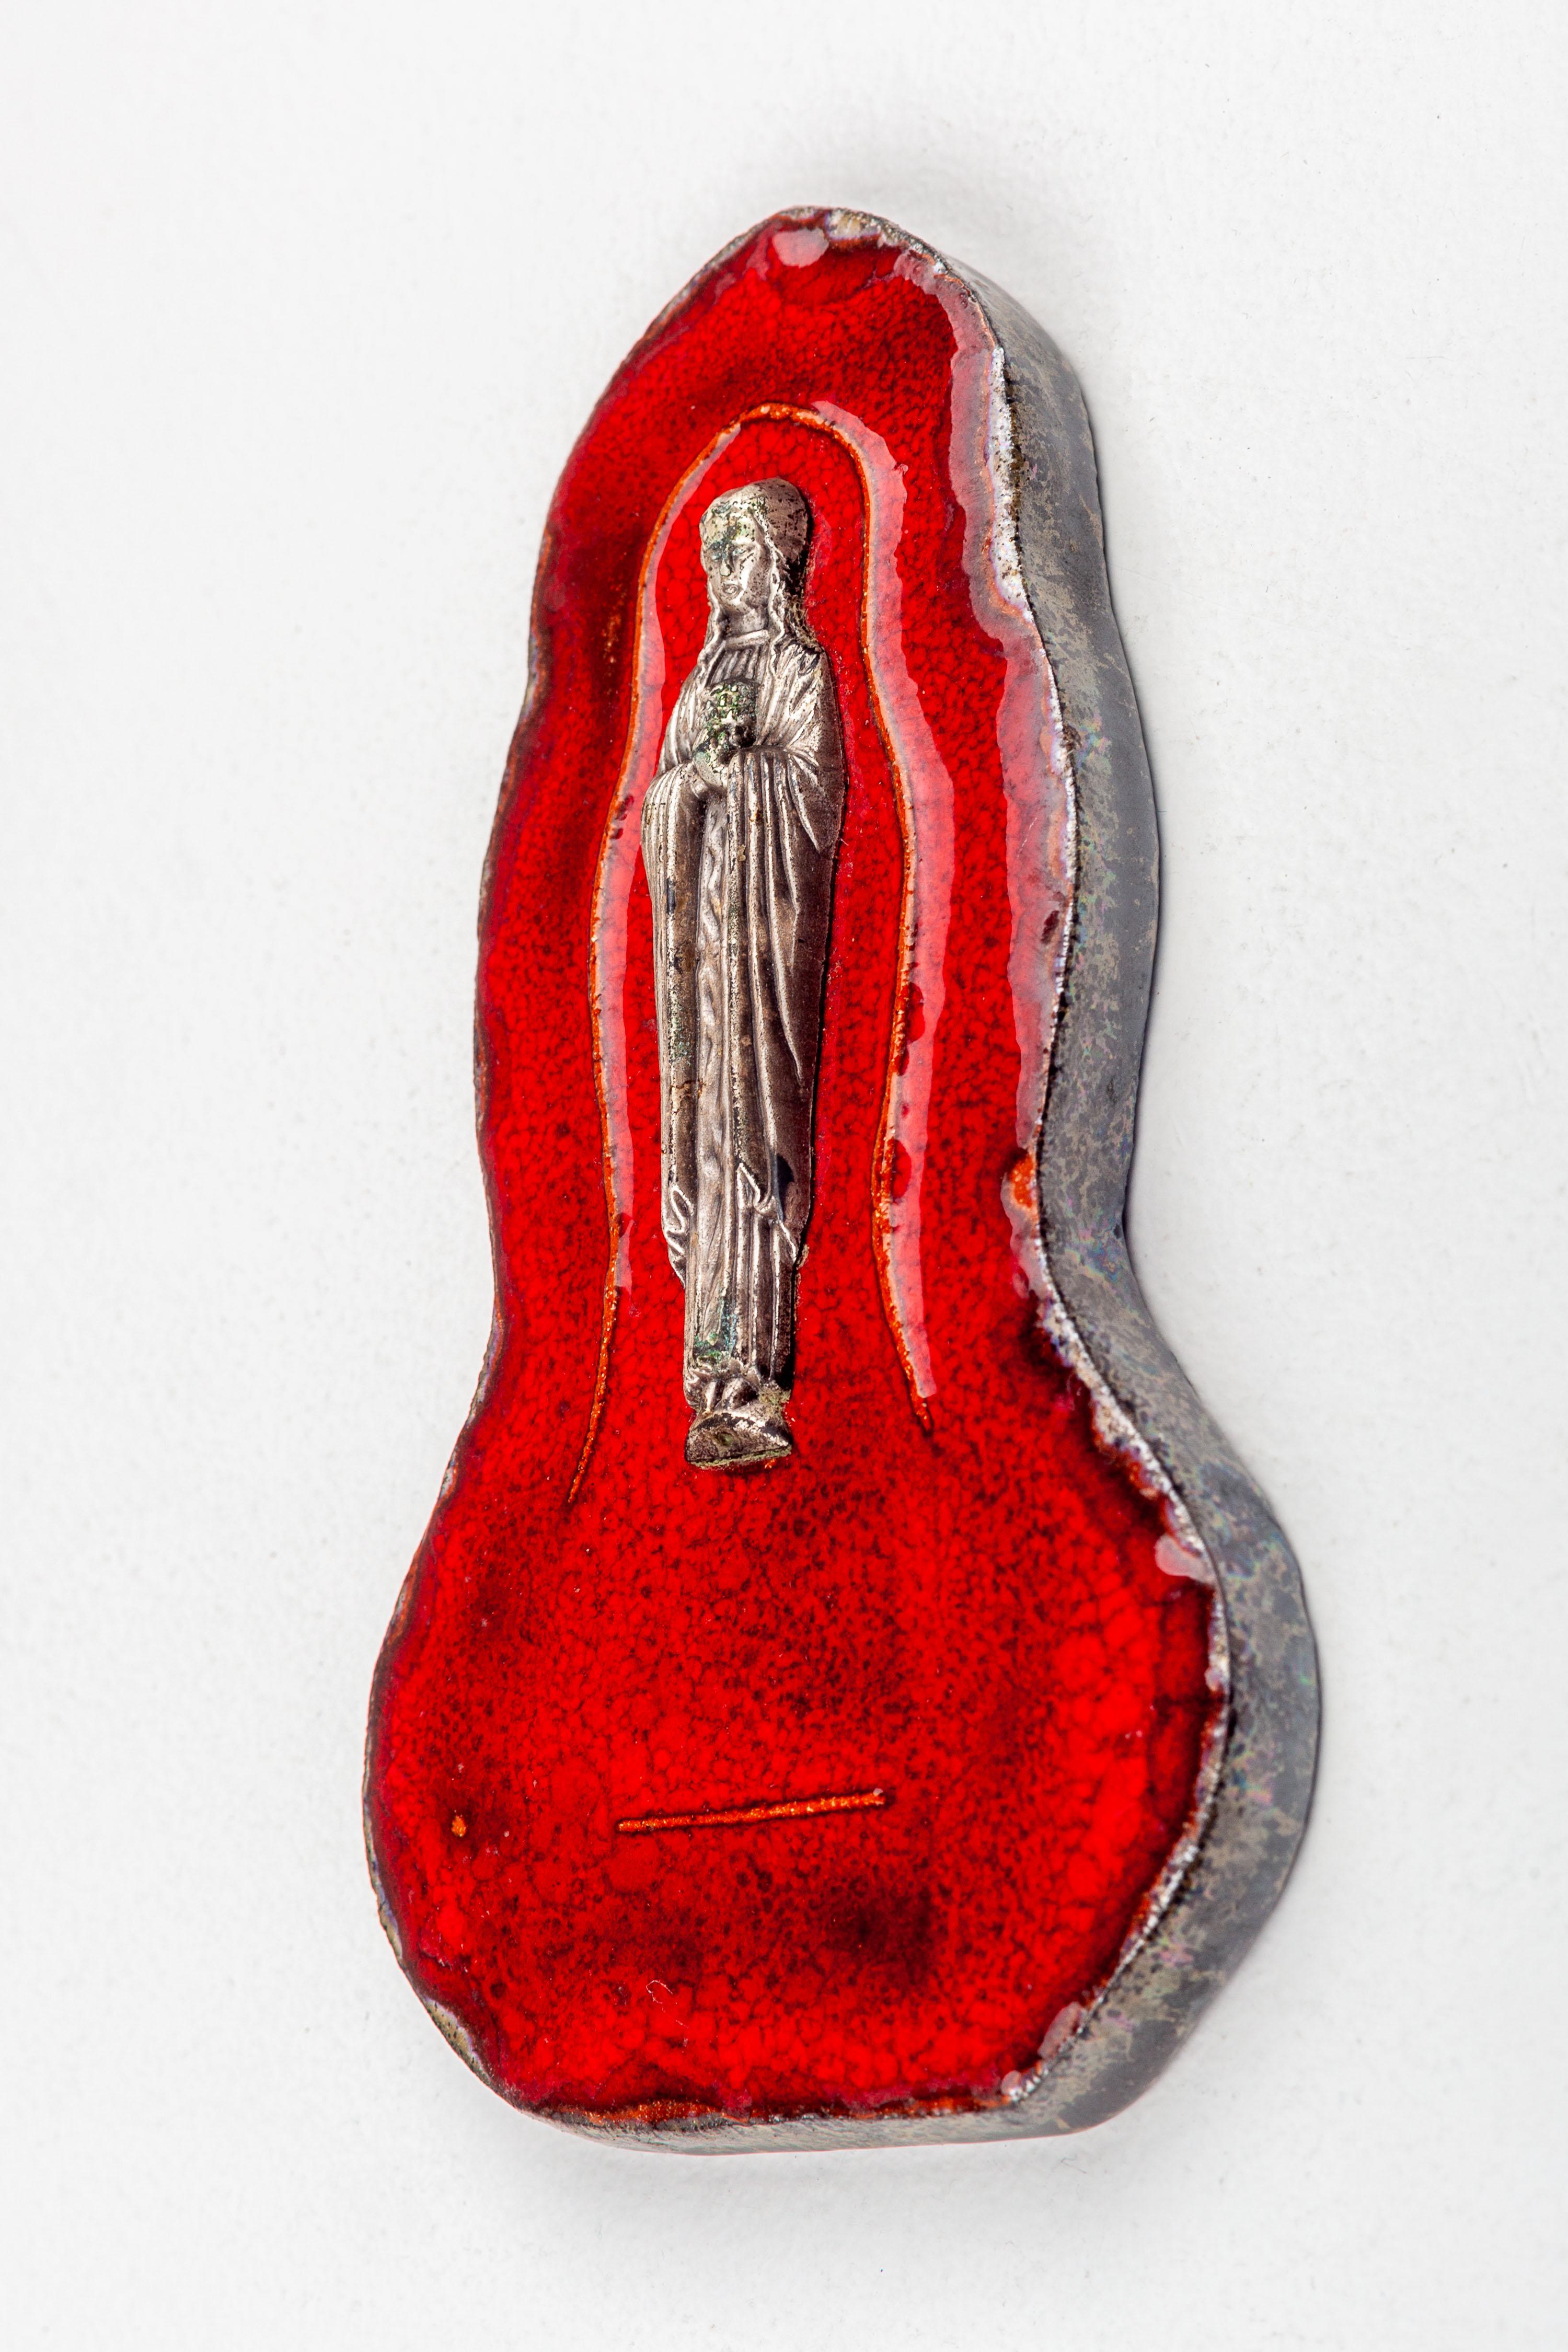 Midcentury Ceramic Wall Plaque with Metal Virgin Mary, European Studio Pottery For Sale 6